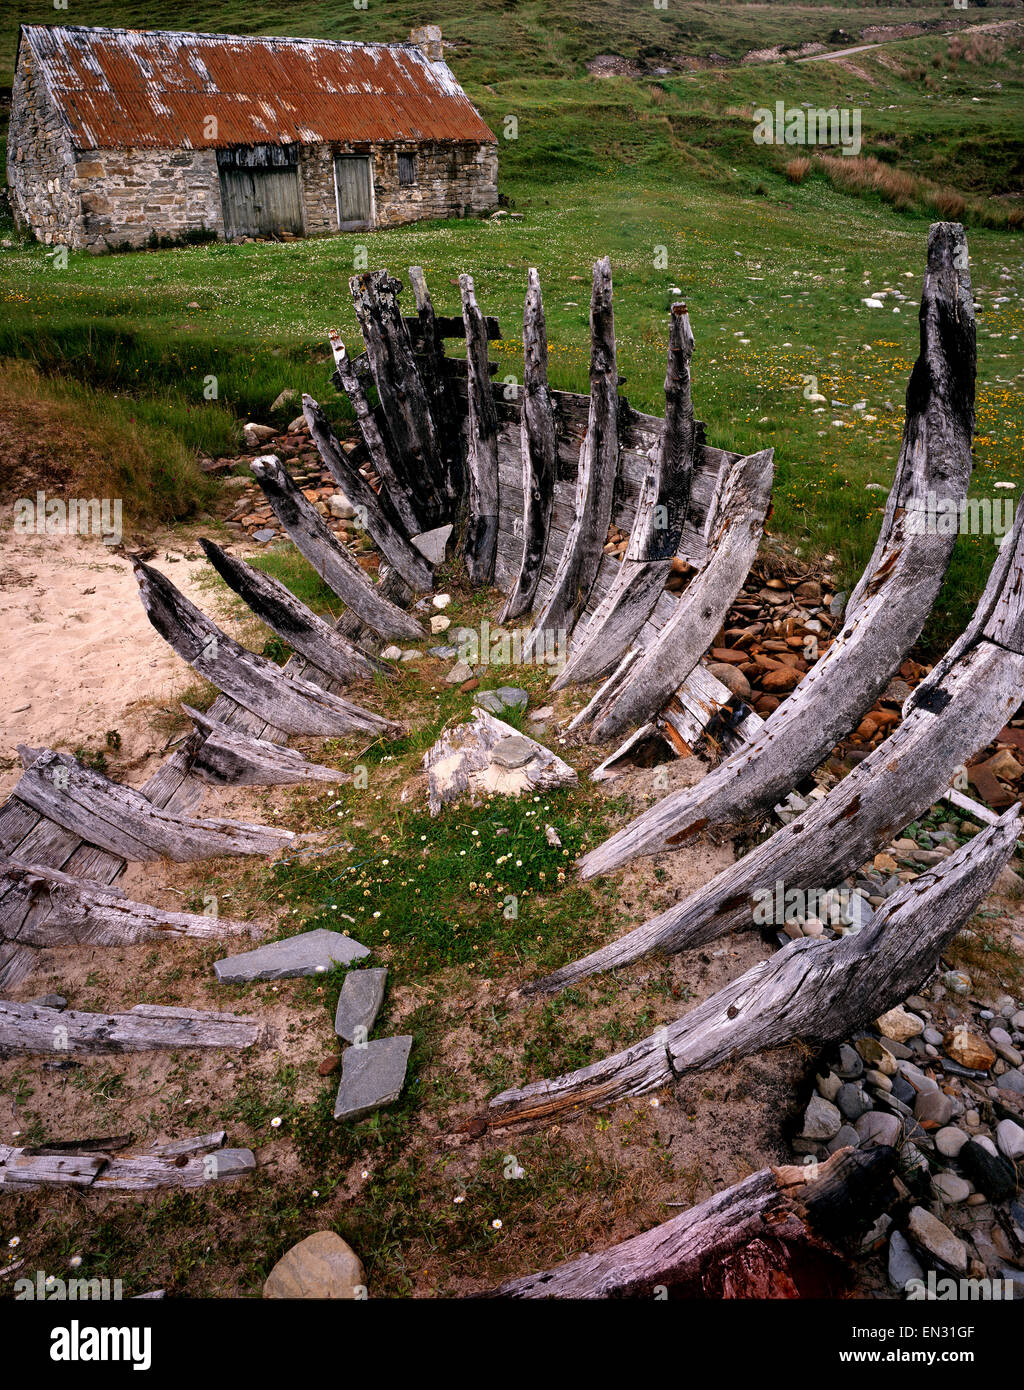 The wreck of an old fishing boat aground at Talmine Bay, Talmine, Kyle of Tongue, Sutherland, Scotland, UK. Stock Photo